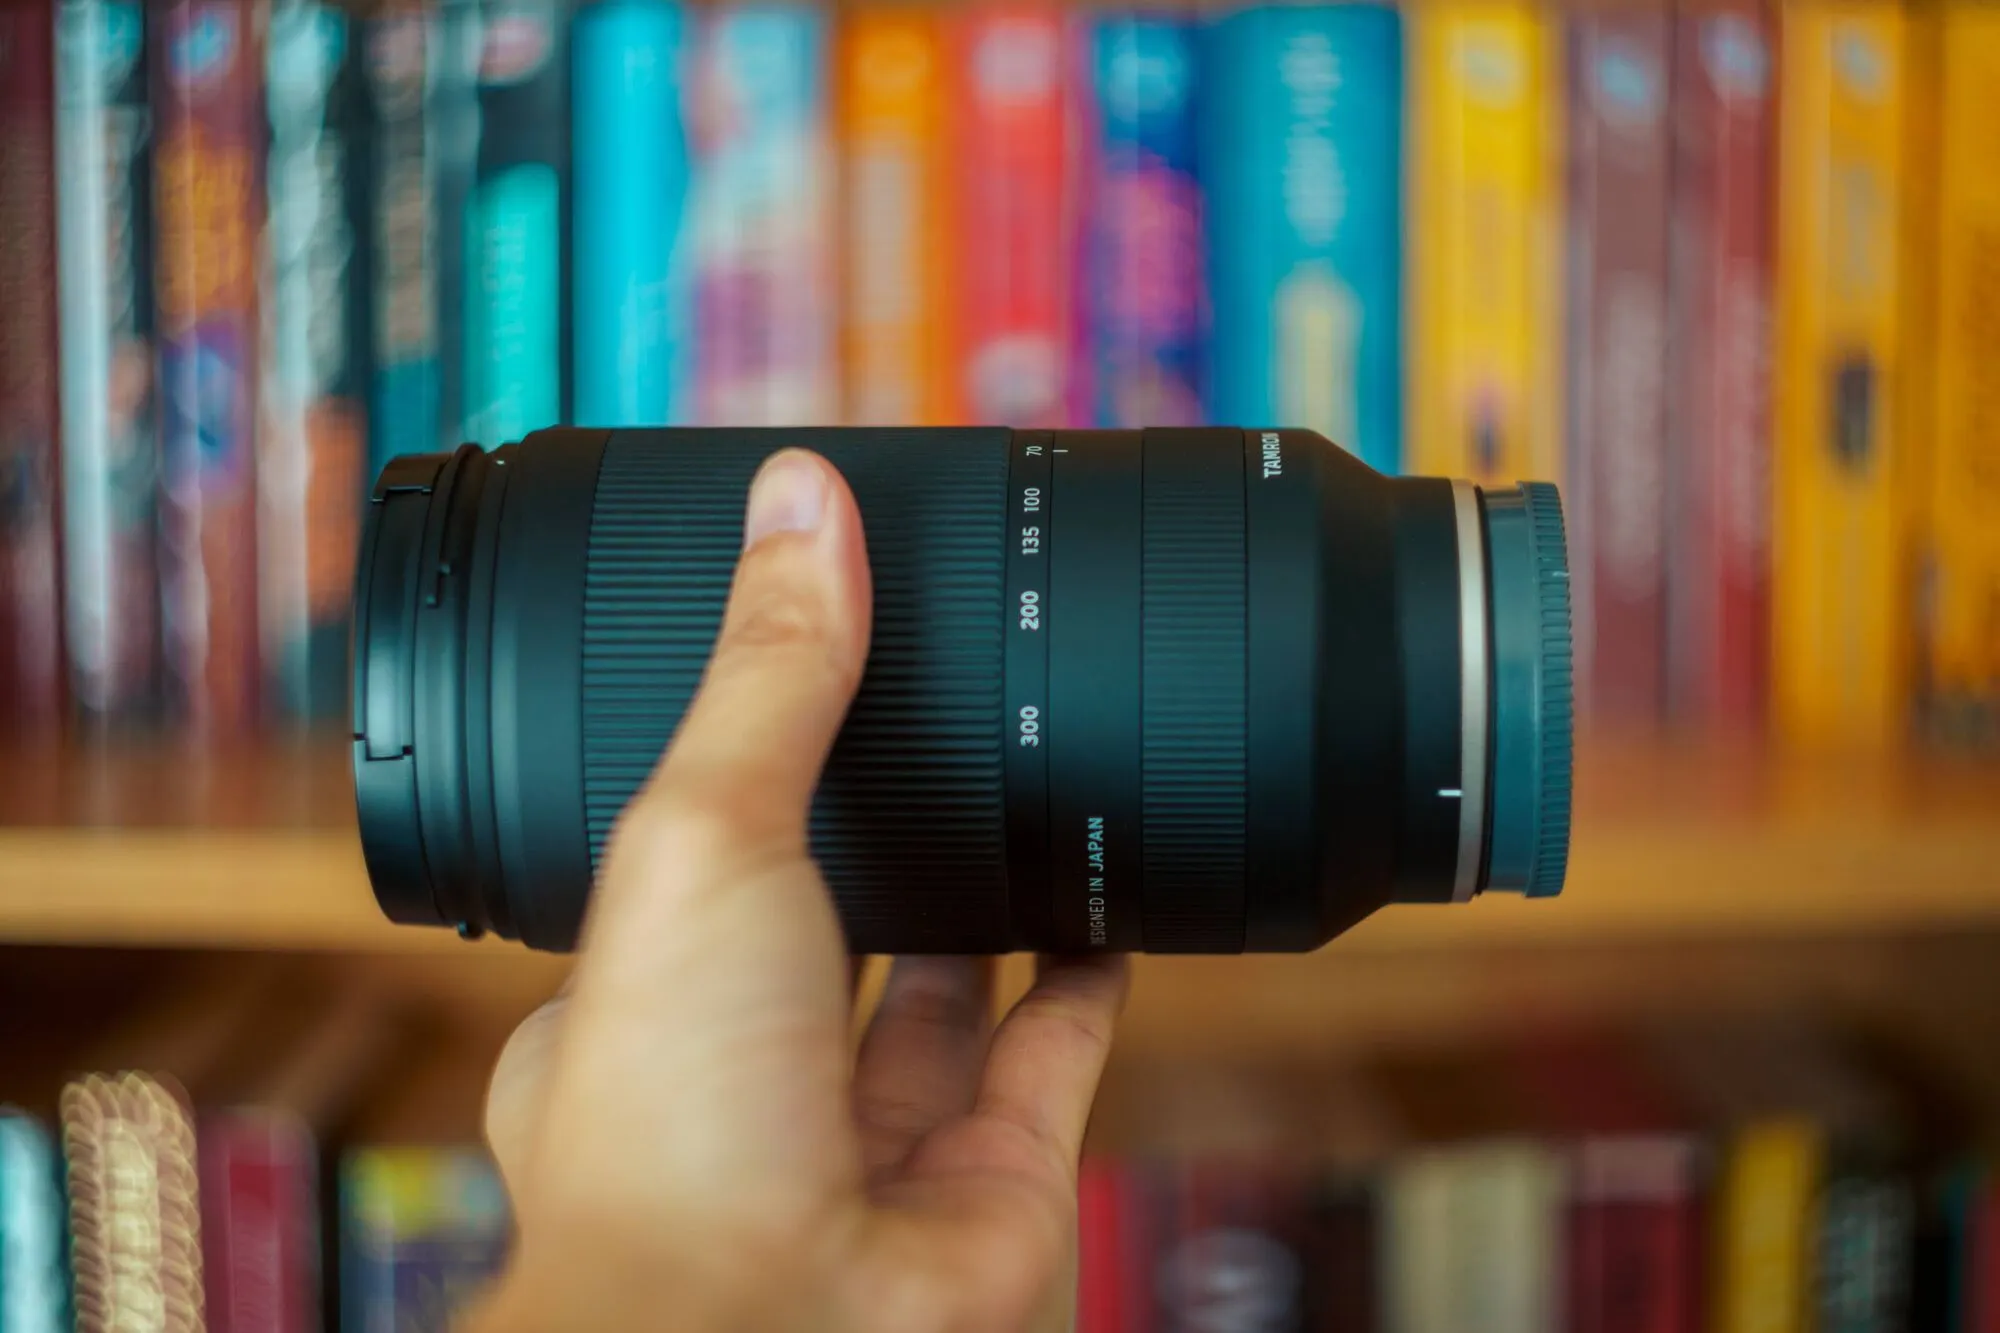 A Traveler's Review: Tamron 70-300mm F4.5-6.3 Di III RXD